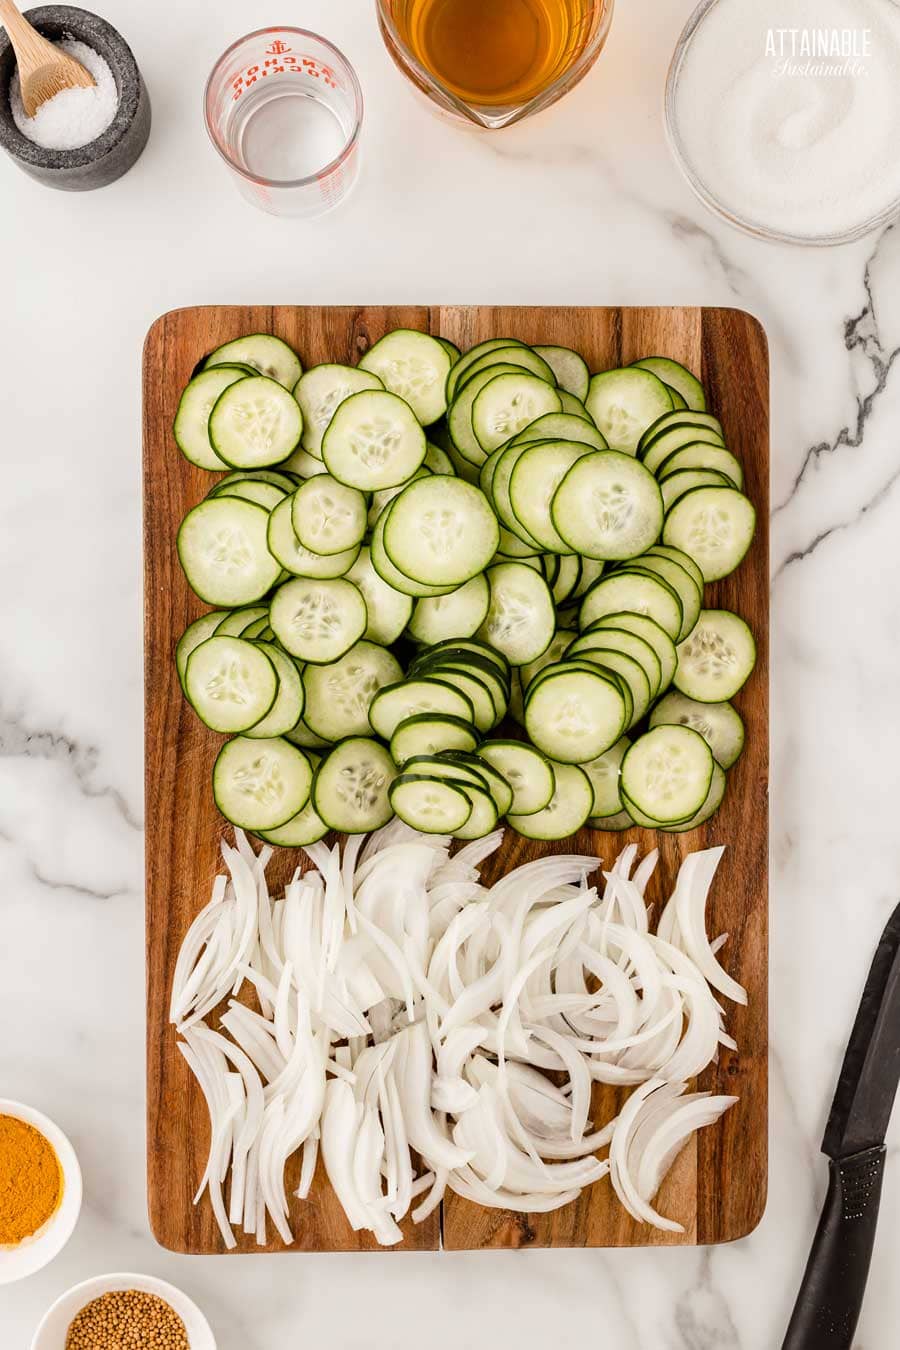 cucumber rounds and onion slices on a cutting board.